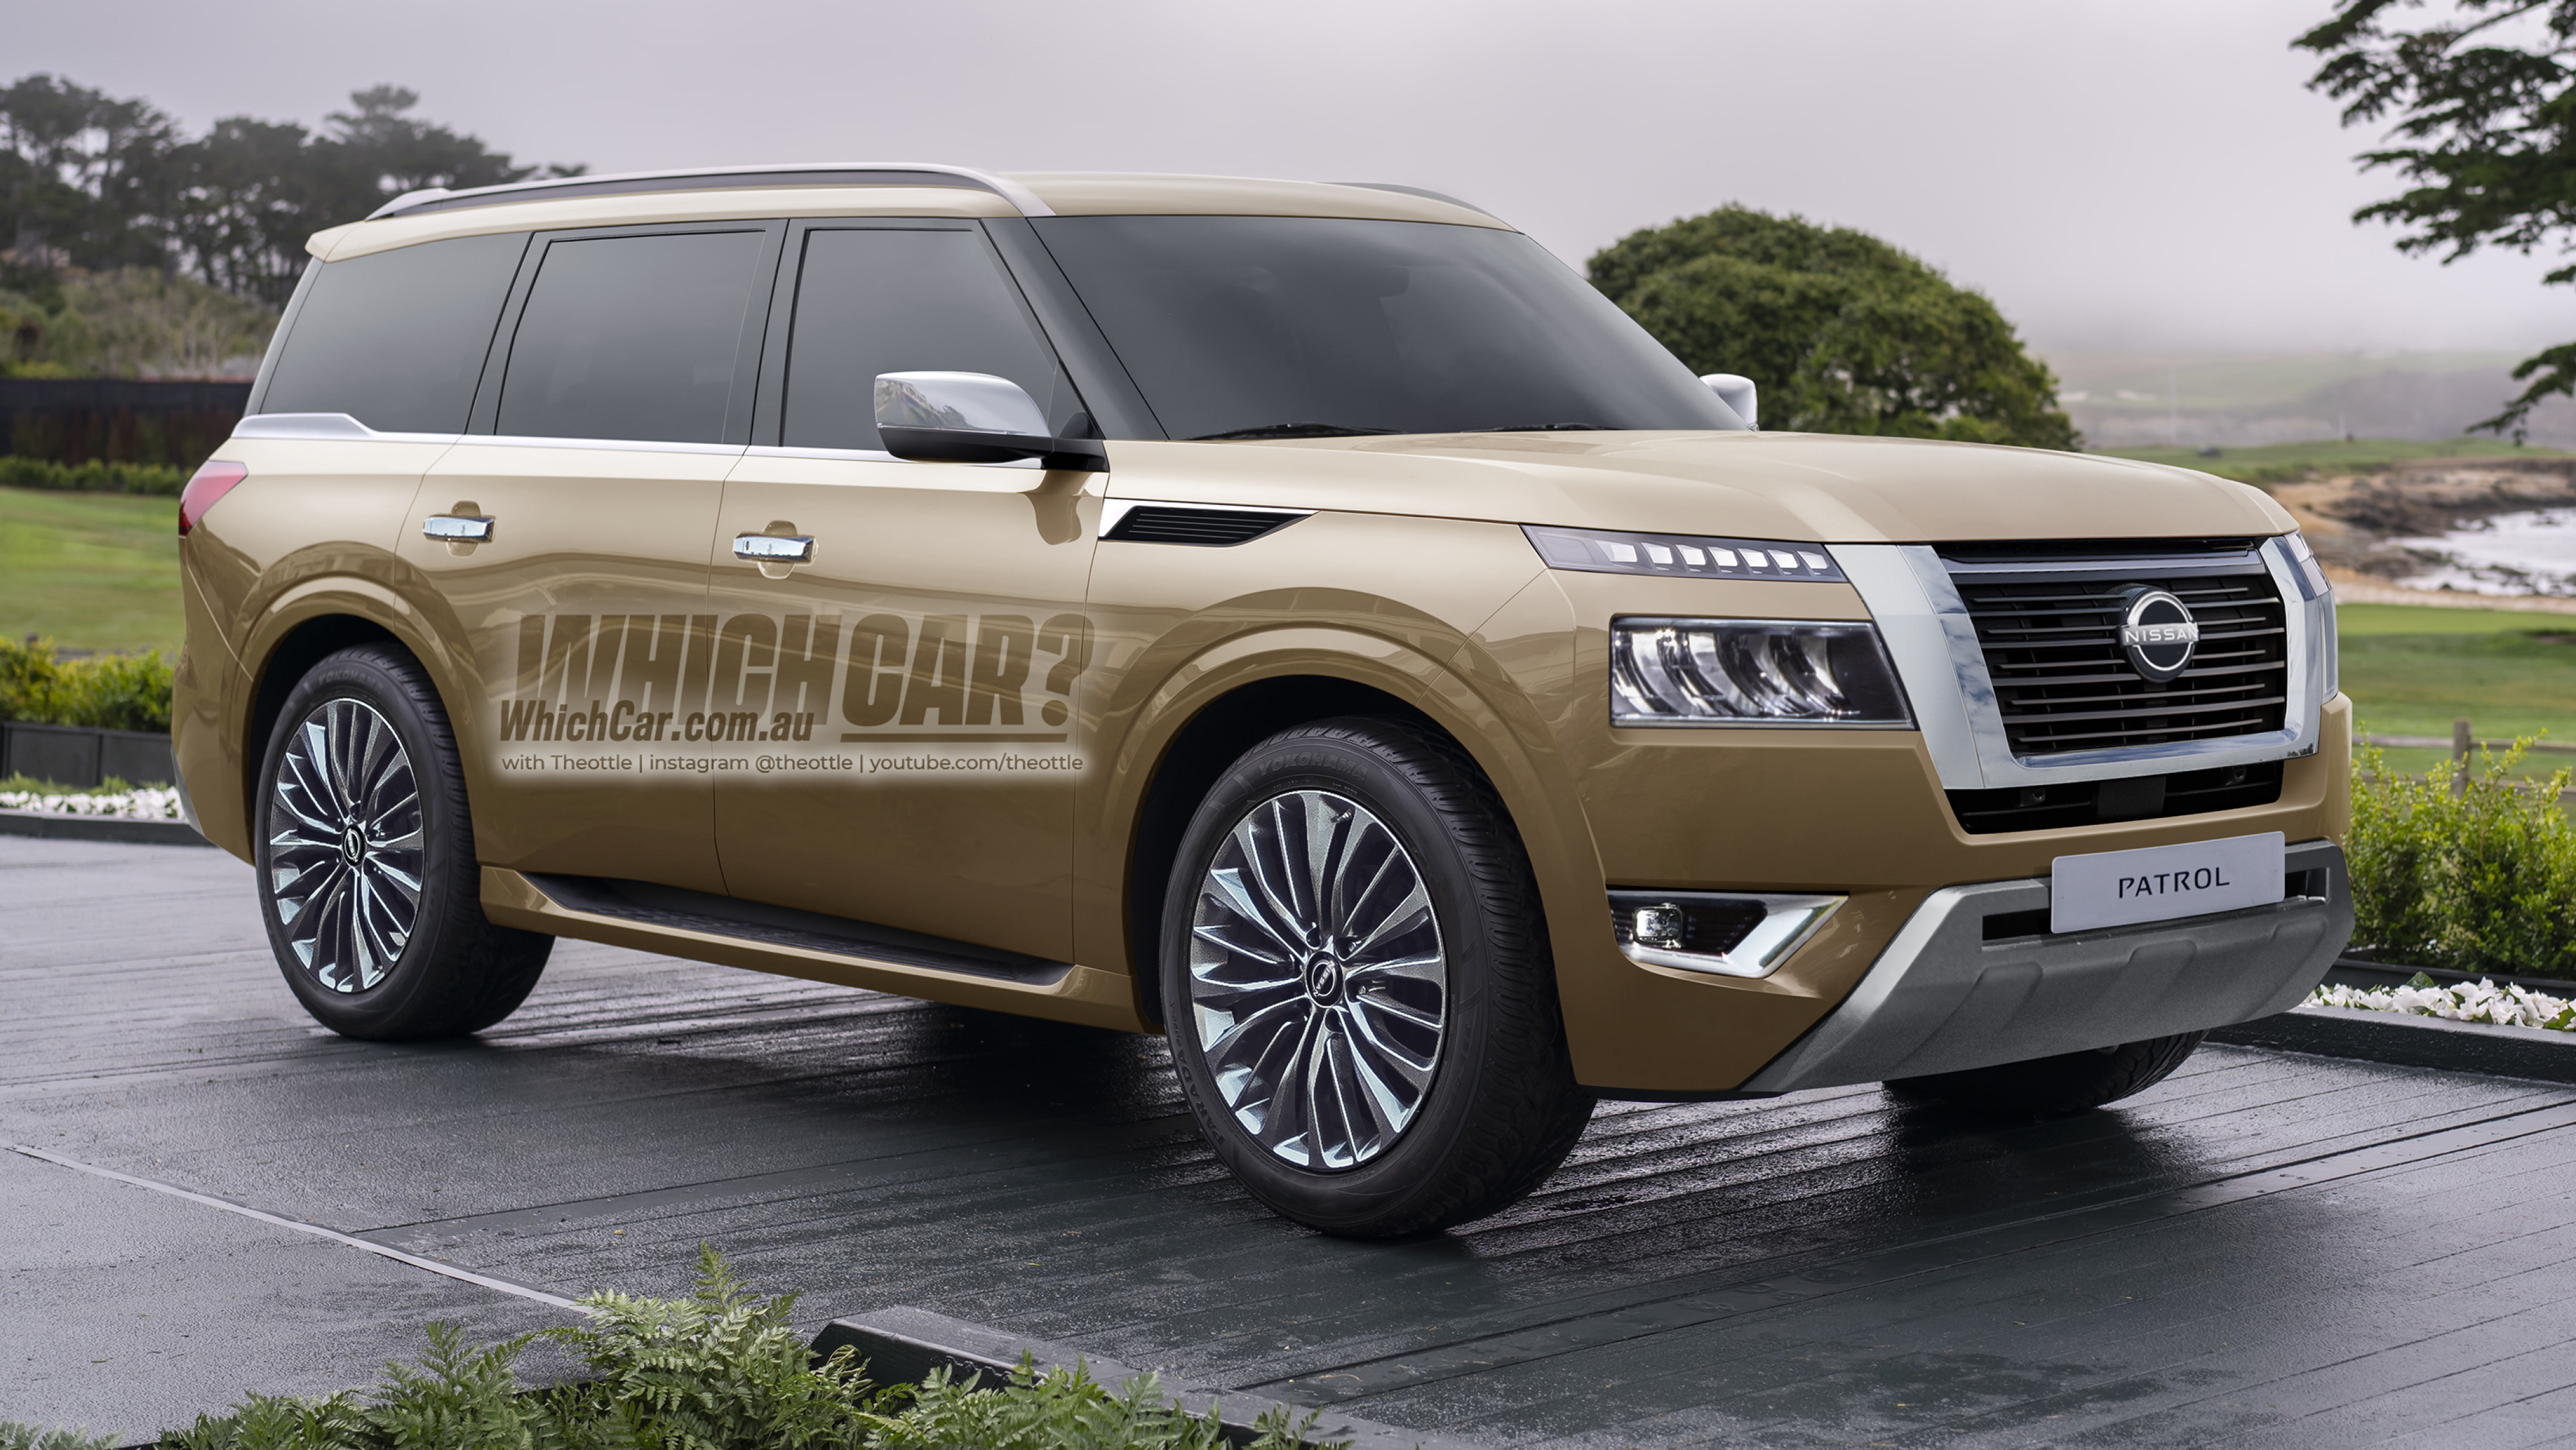 30a11dad/2025 nissan patrol imagined whichcar australia theottle 01 png